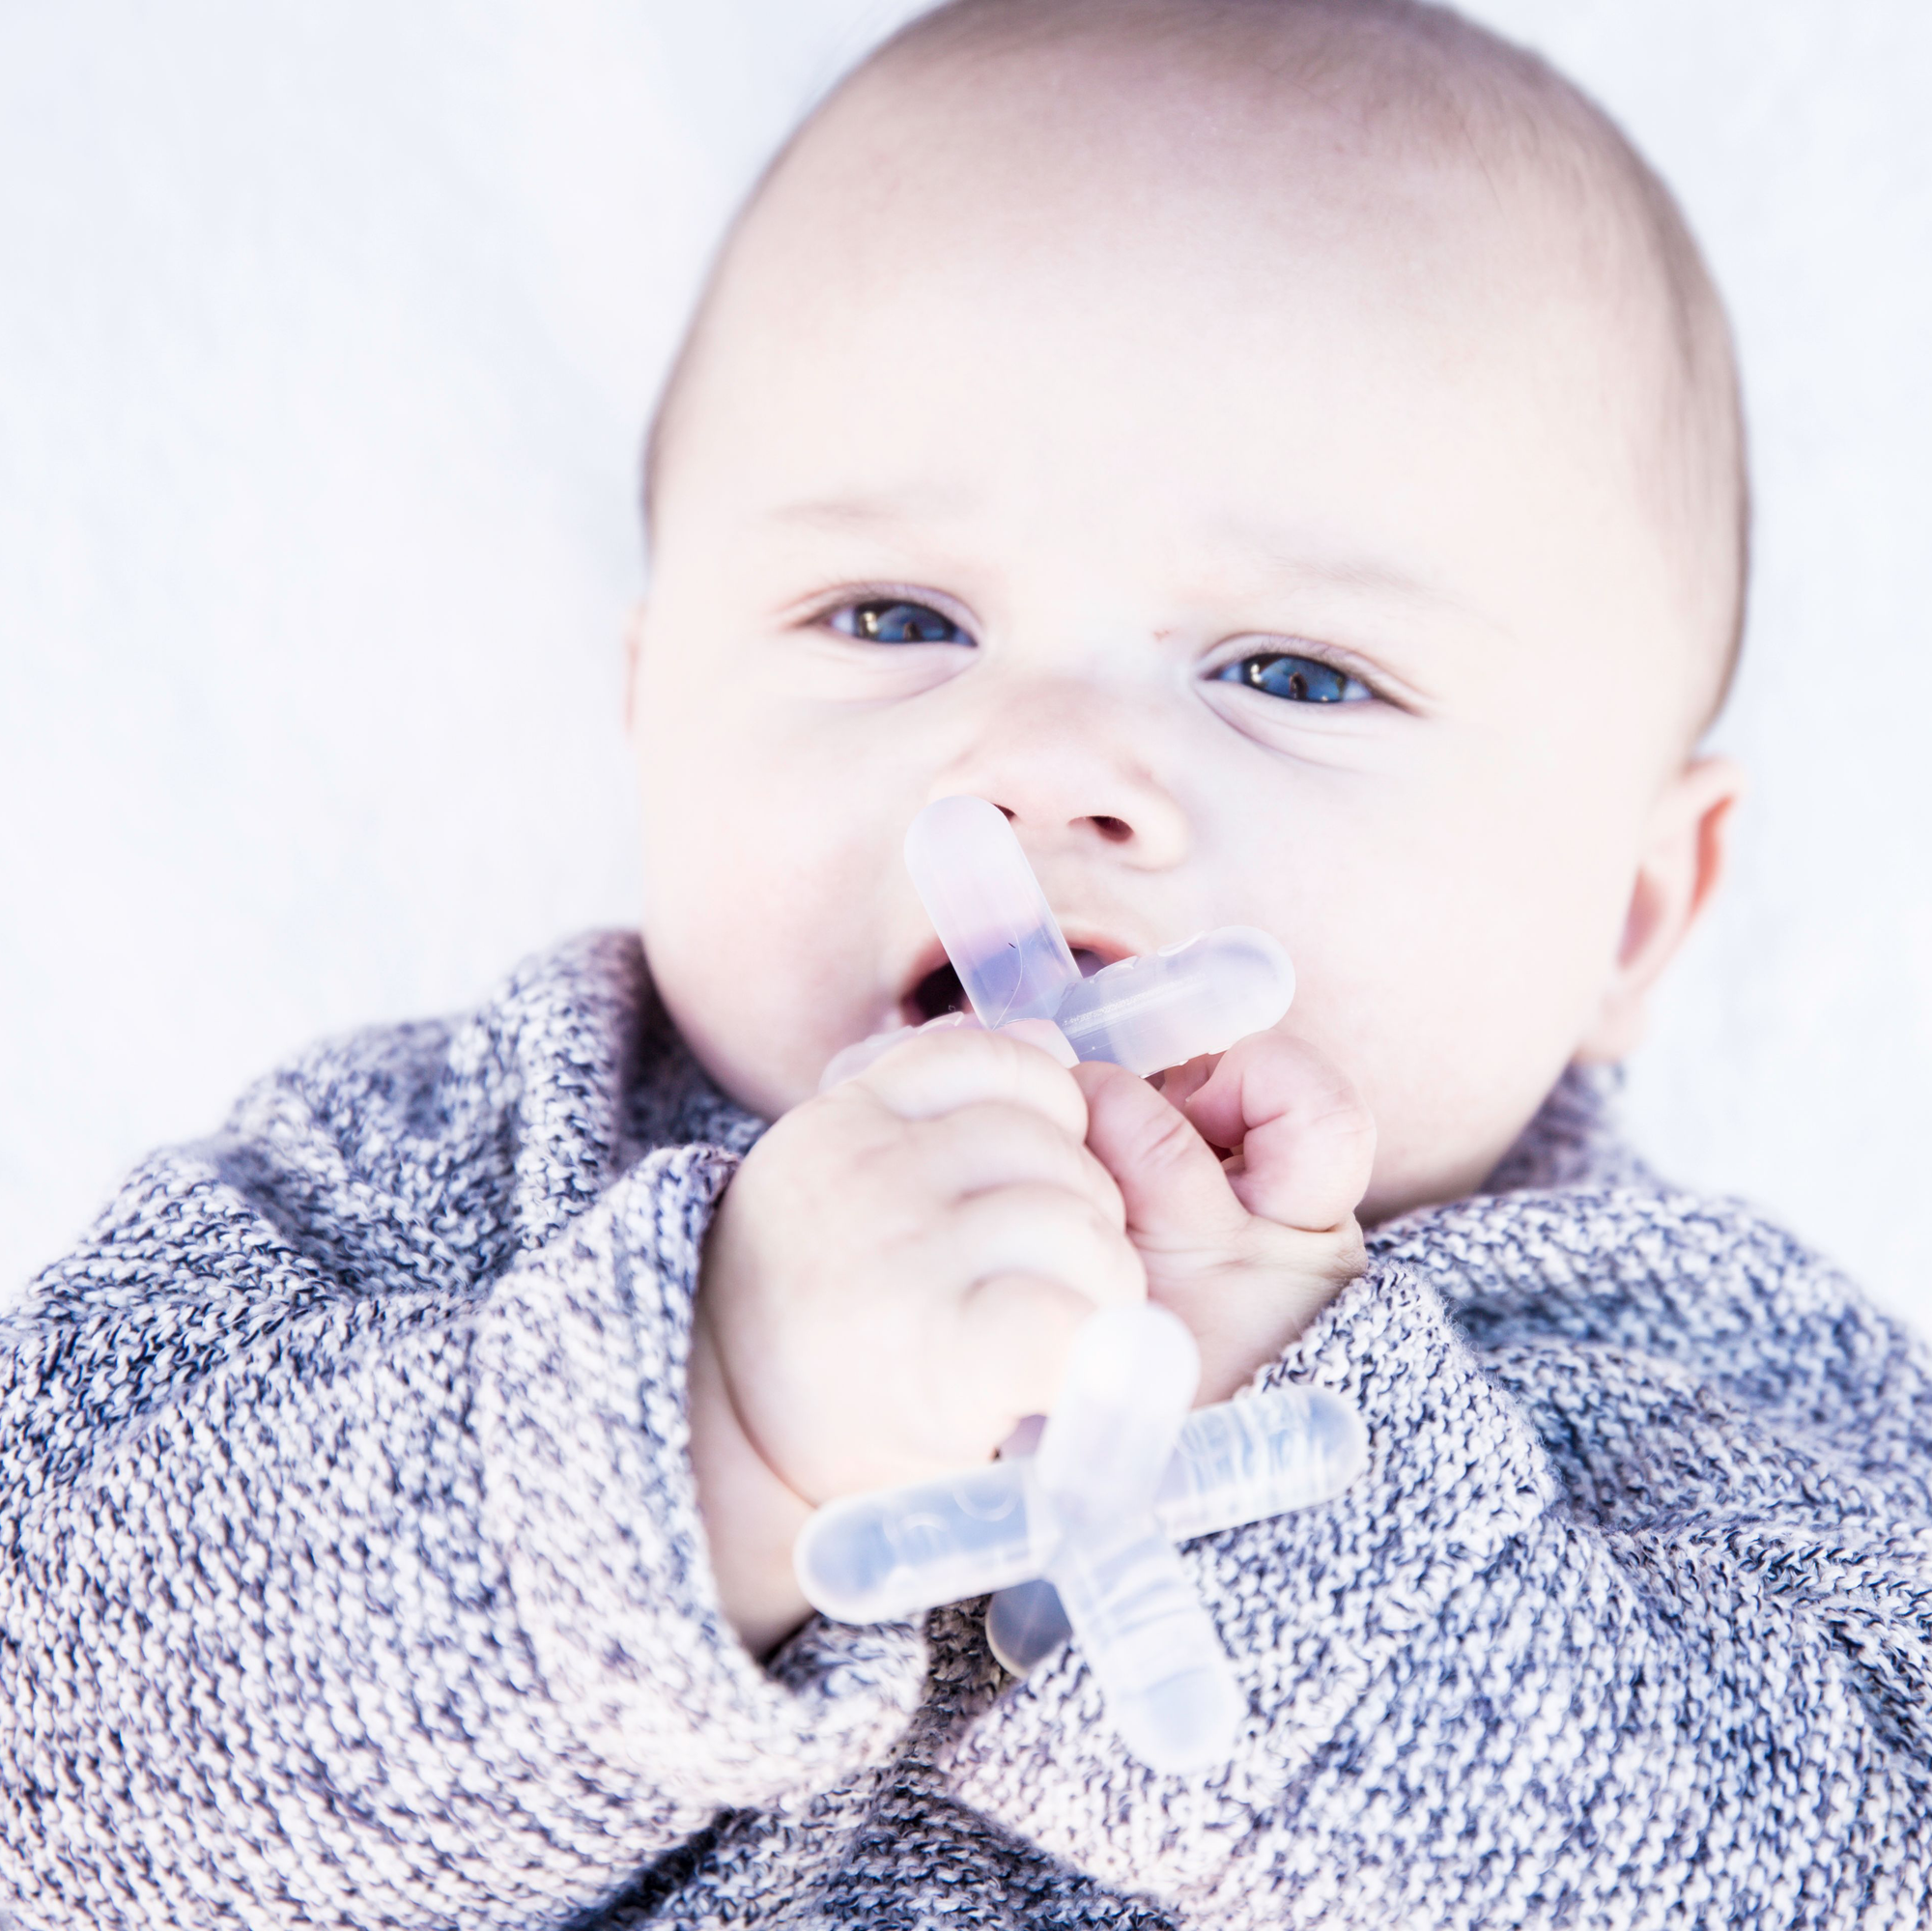 Best Baby Teethers: The Best Baby Teethers for a Blissful Teething Experience